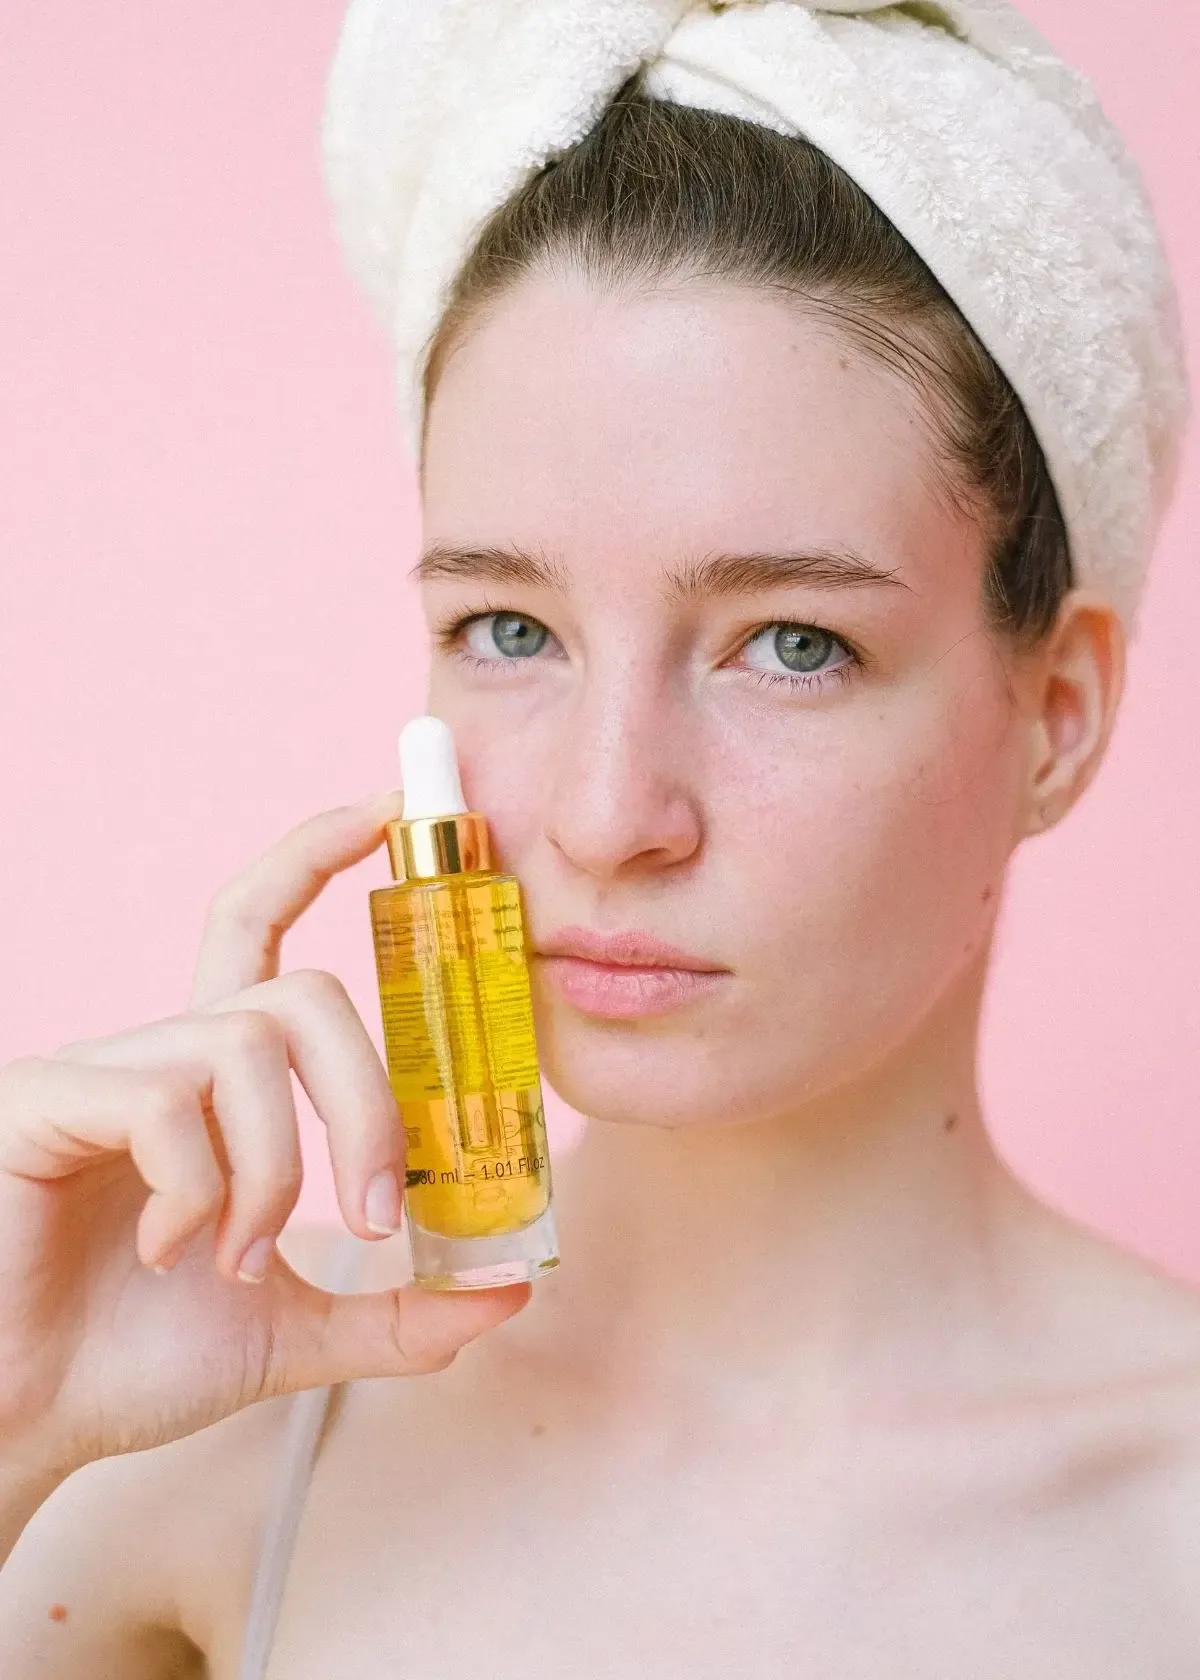 How to choose the right anti-aging serum?